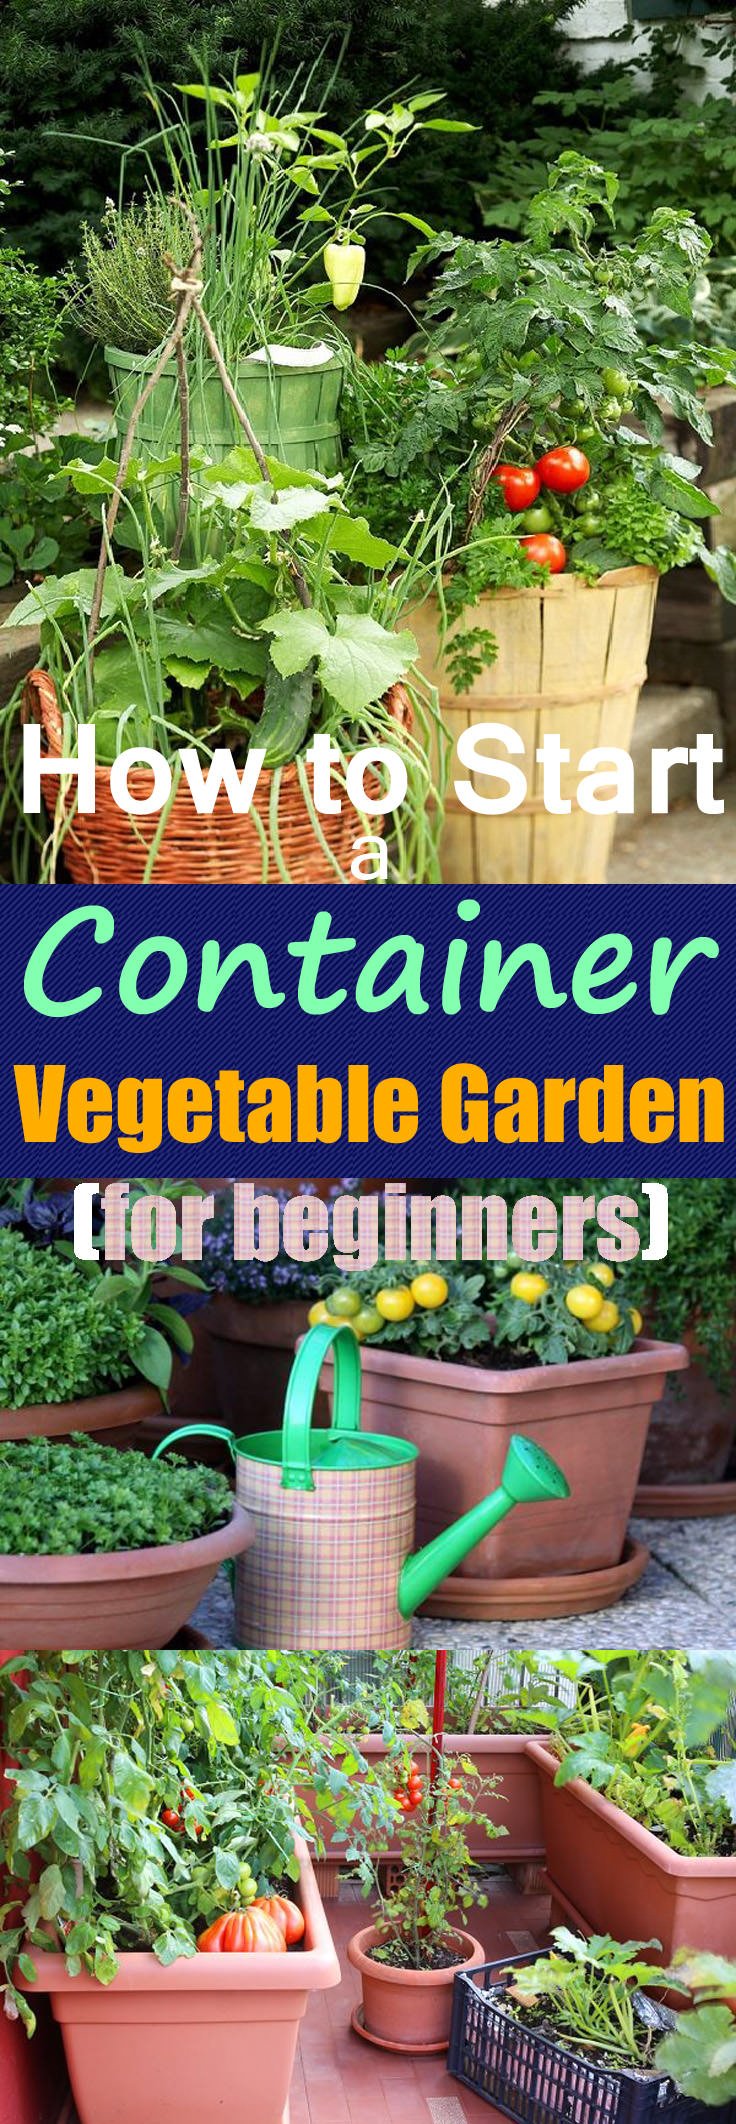 Growing vegetables in pots is an excellent idea if you have a limited space, starting your own container vegetable garden gives you a chance to produce a bountiful harvest of edibles that are freshest and tastiest!